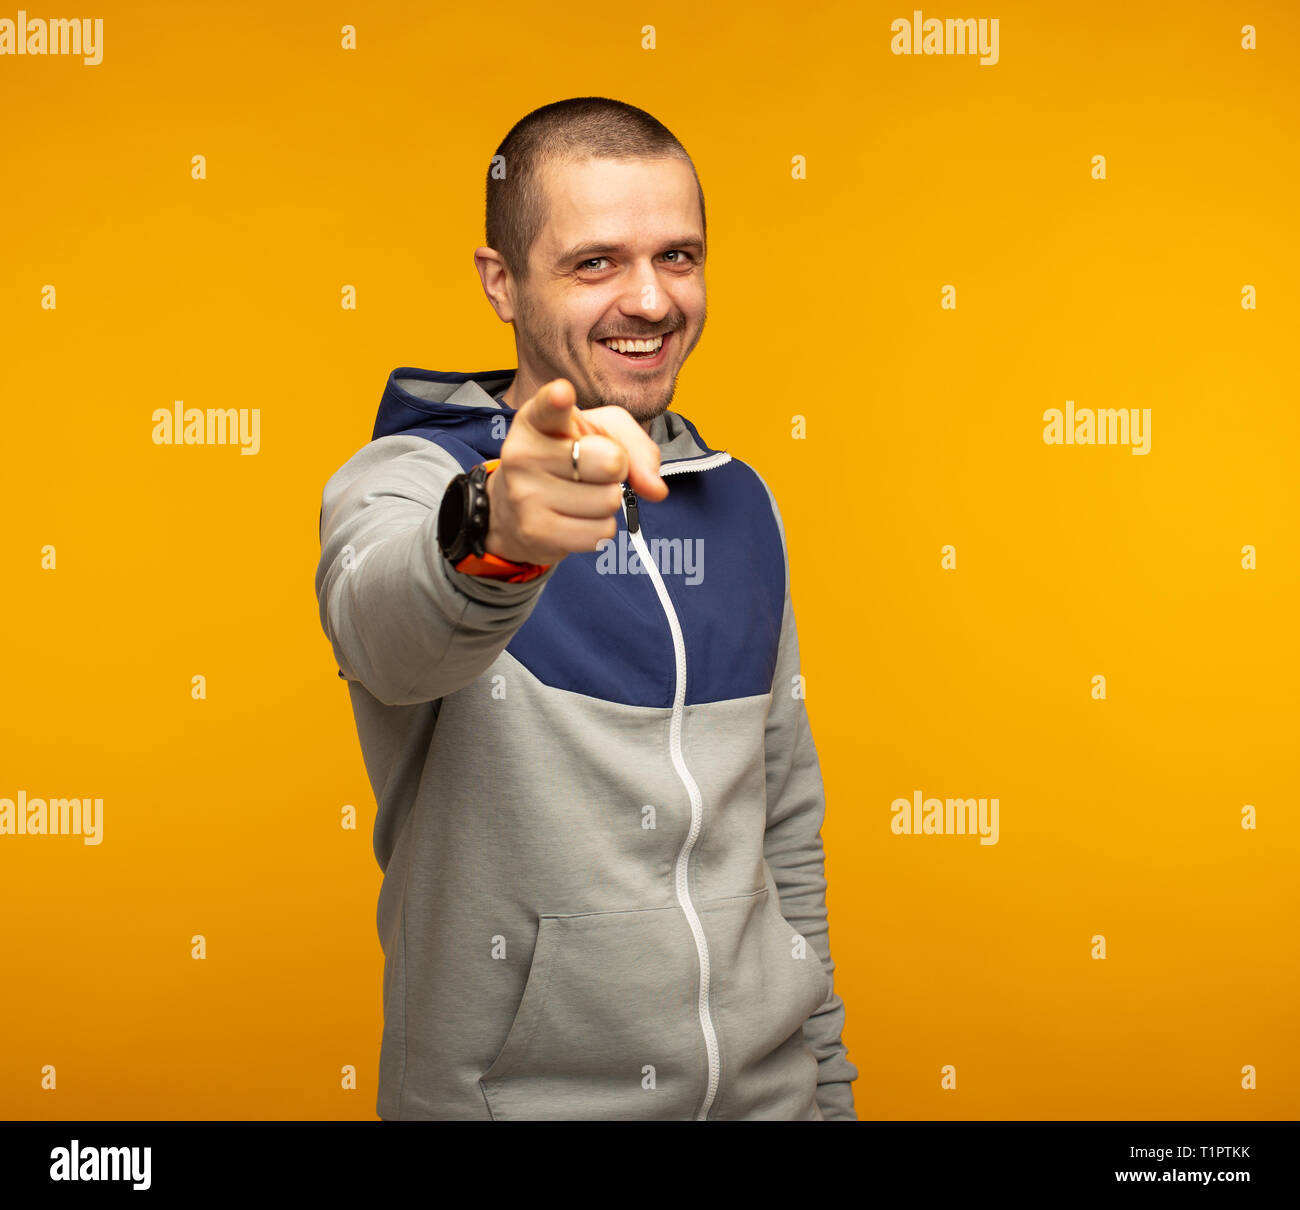 Man in casual wear pointing in camera and smiling Stock Photo